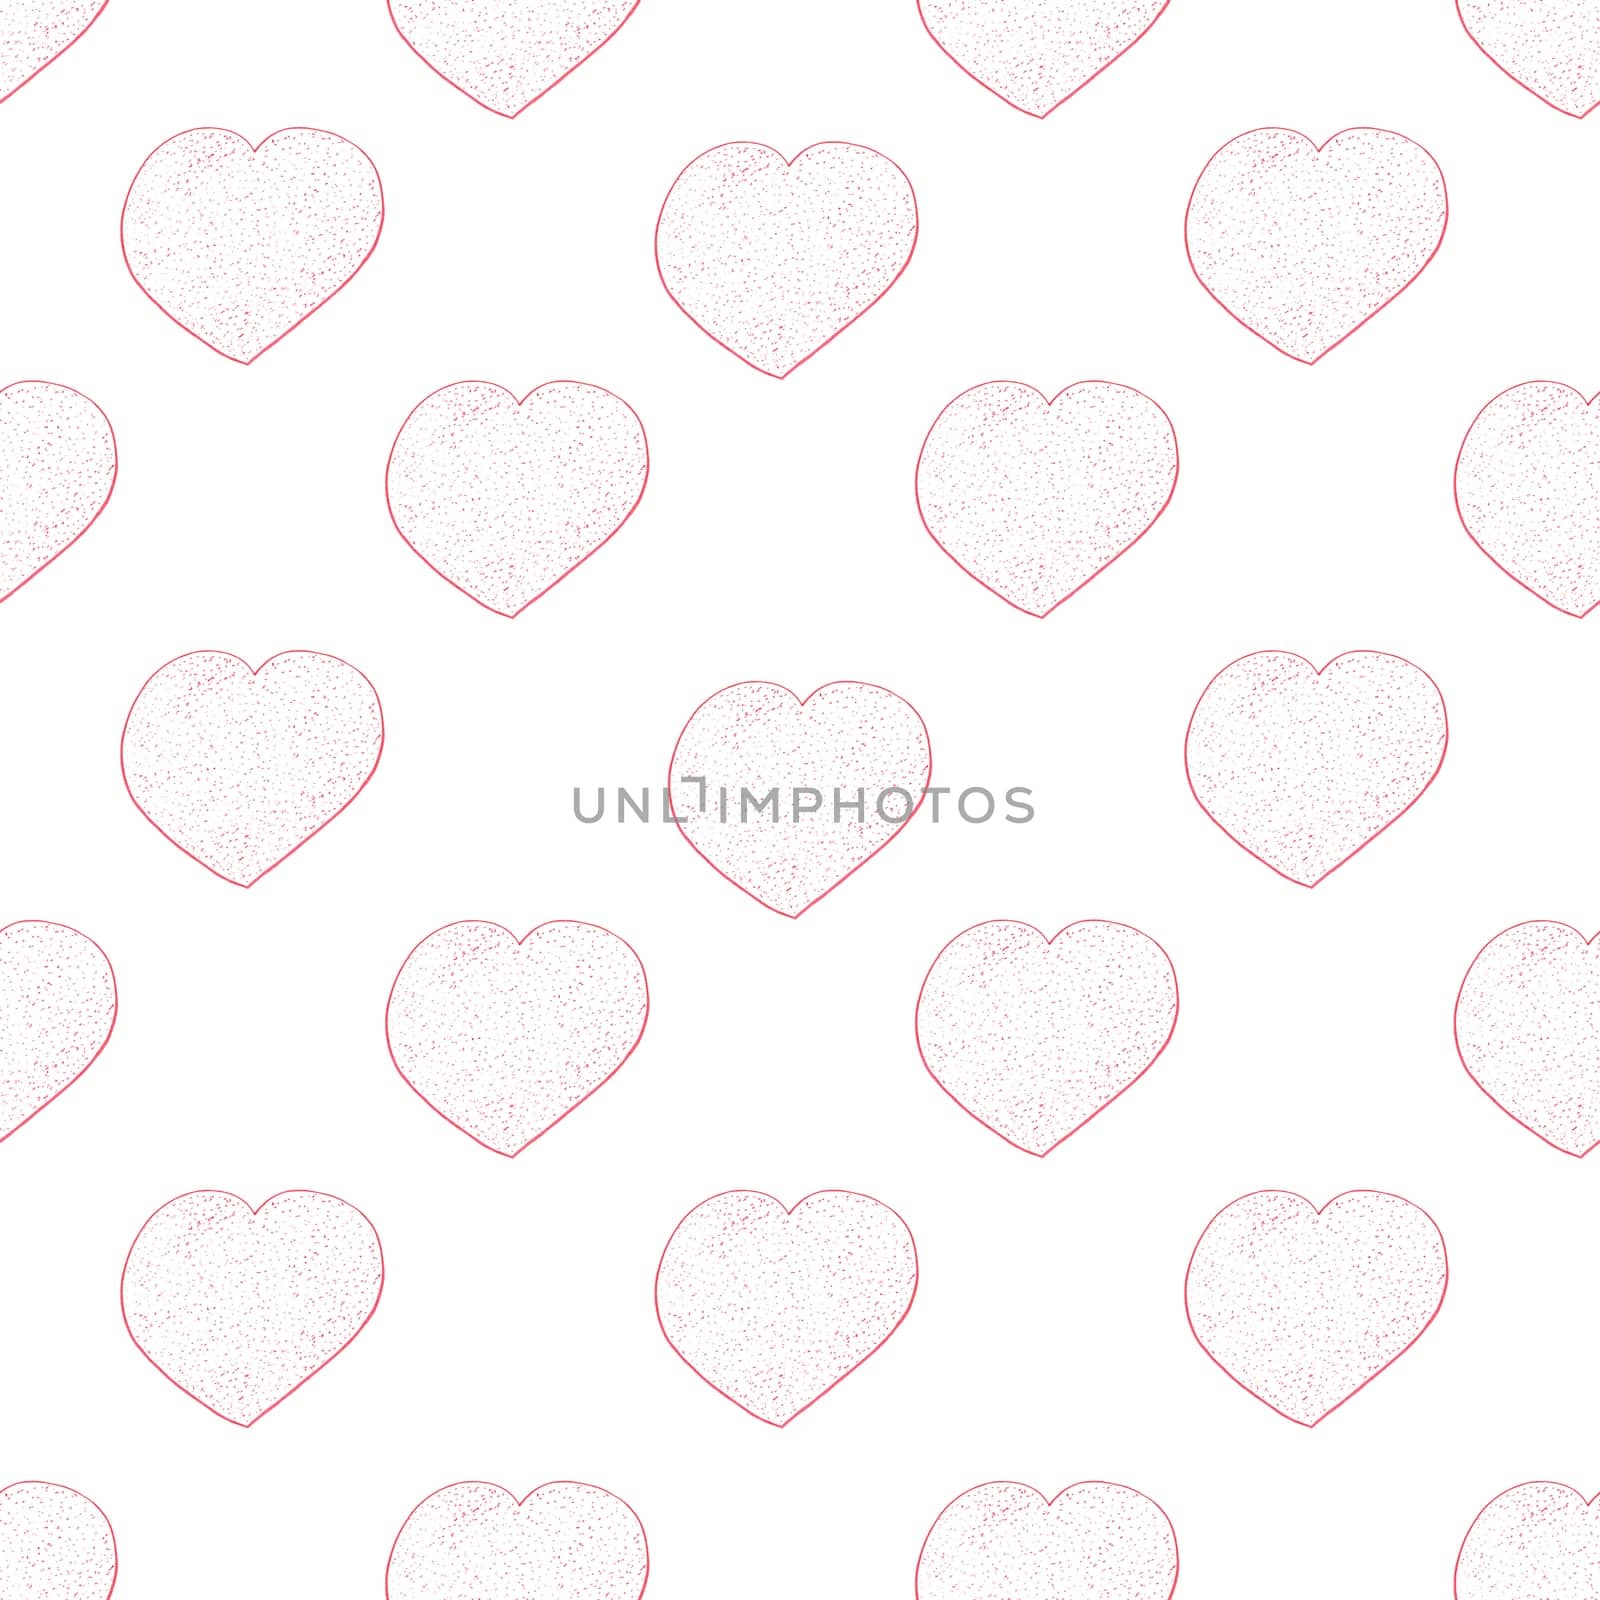 Seamless Pattern with Hearts. Hand Drawn Valentines Background. Red Hearts on White Background. Digital Paper Drawn by Colored Pencils.